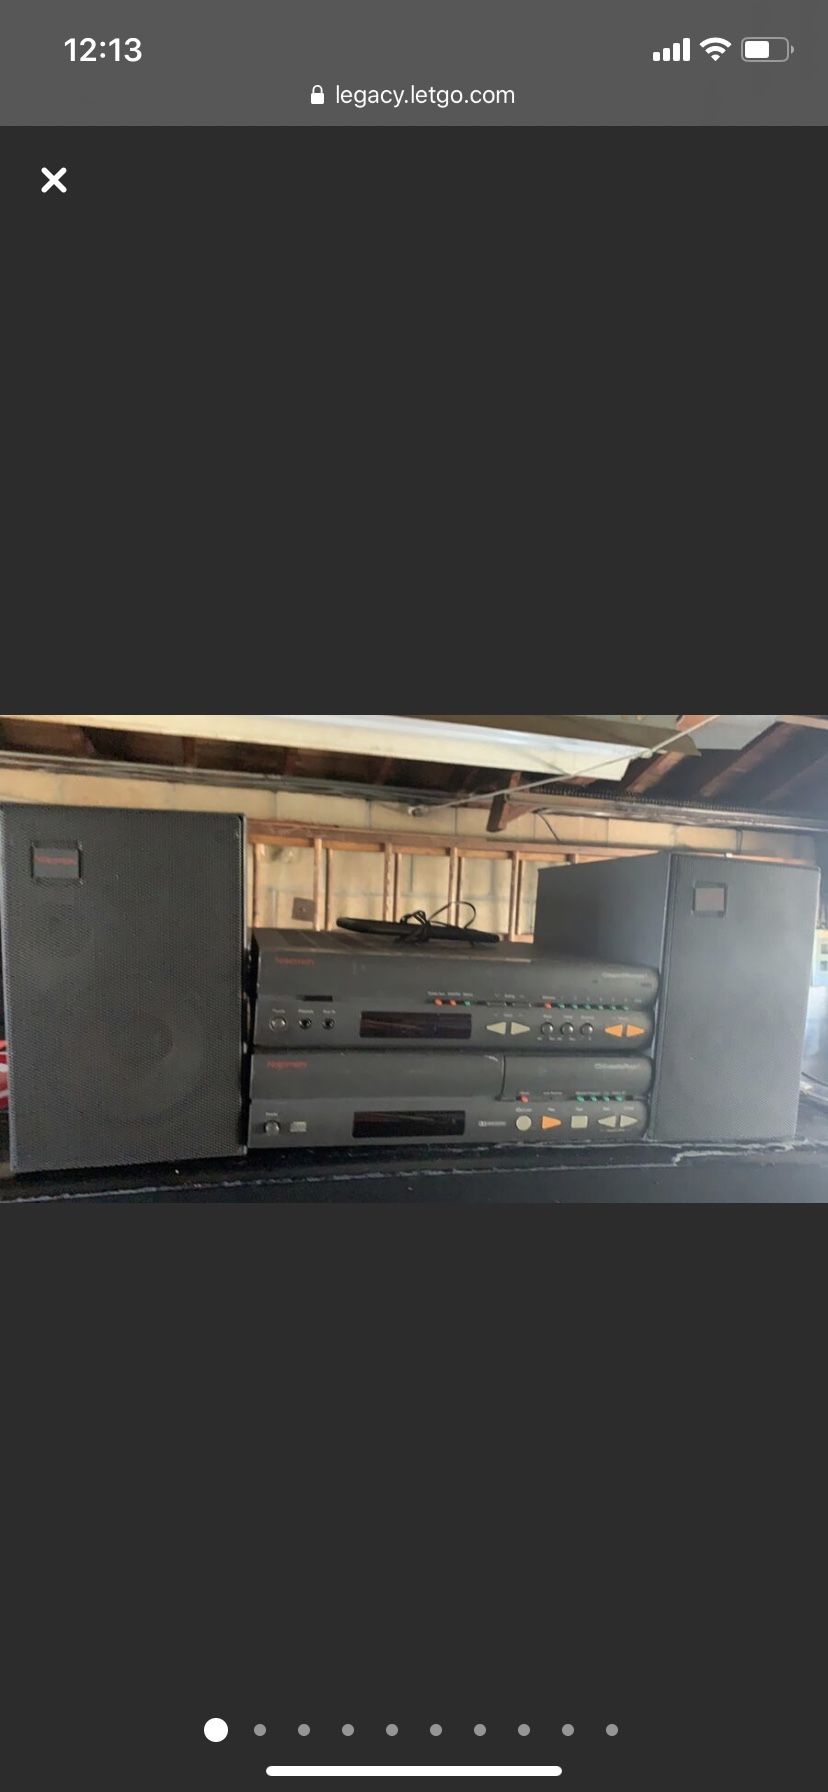 Nakamichi Compact Receiver & Cd Cassette Player speakers Stereo System